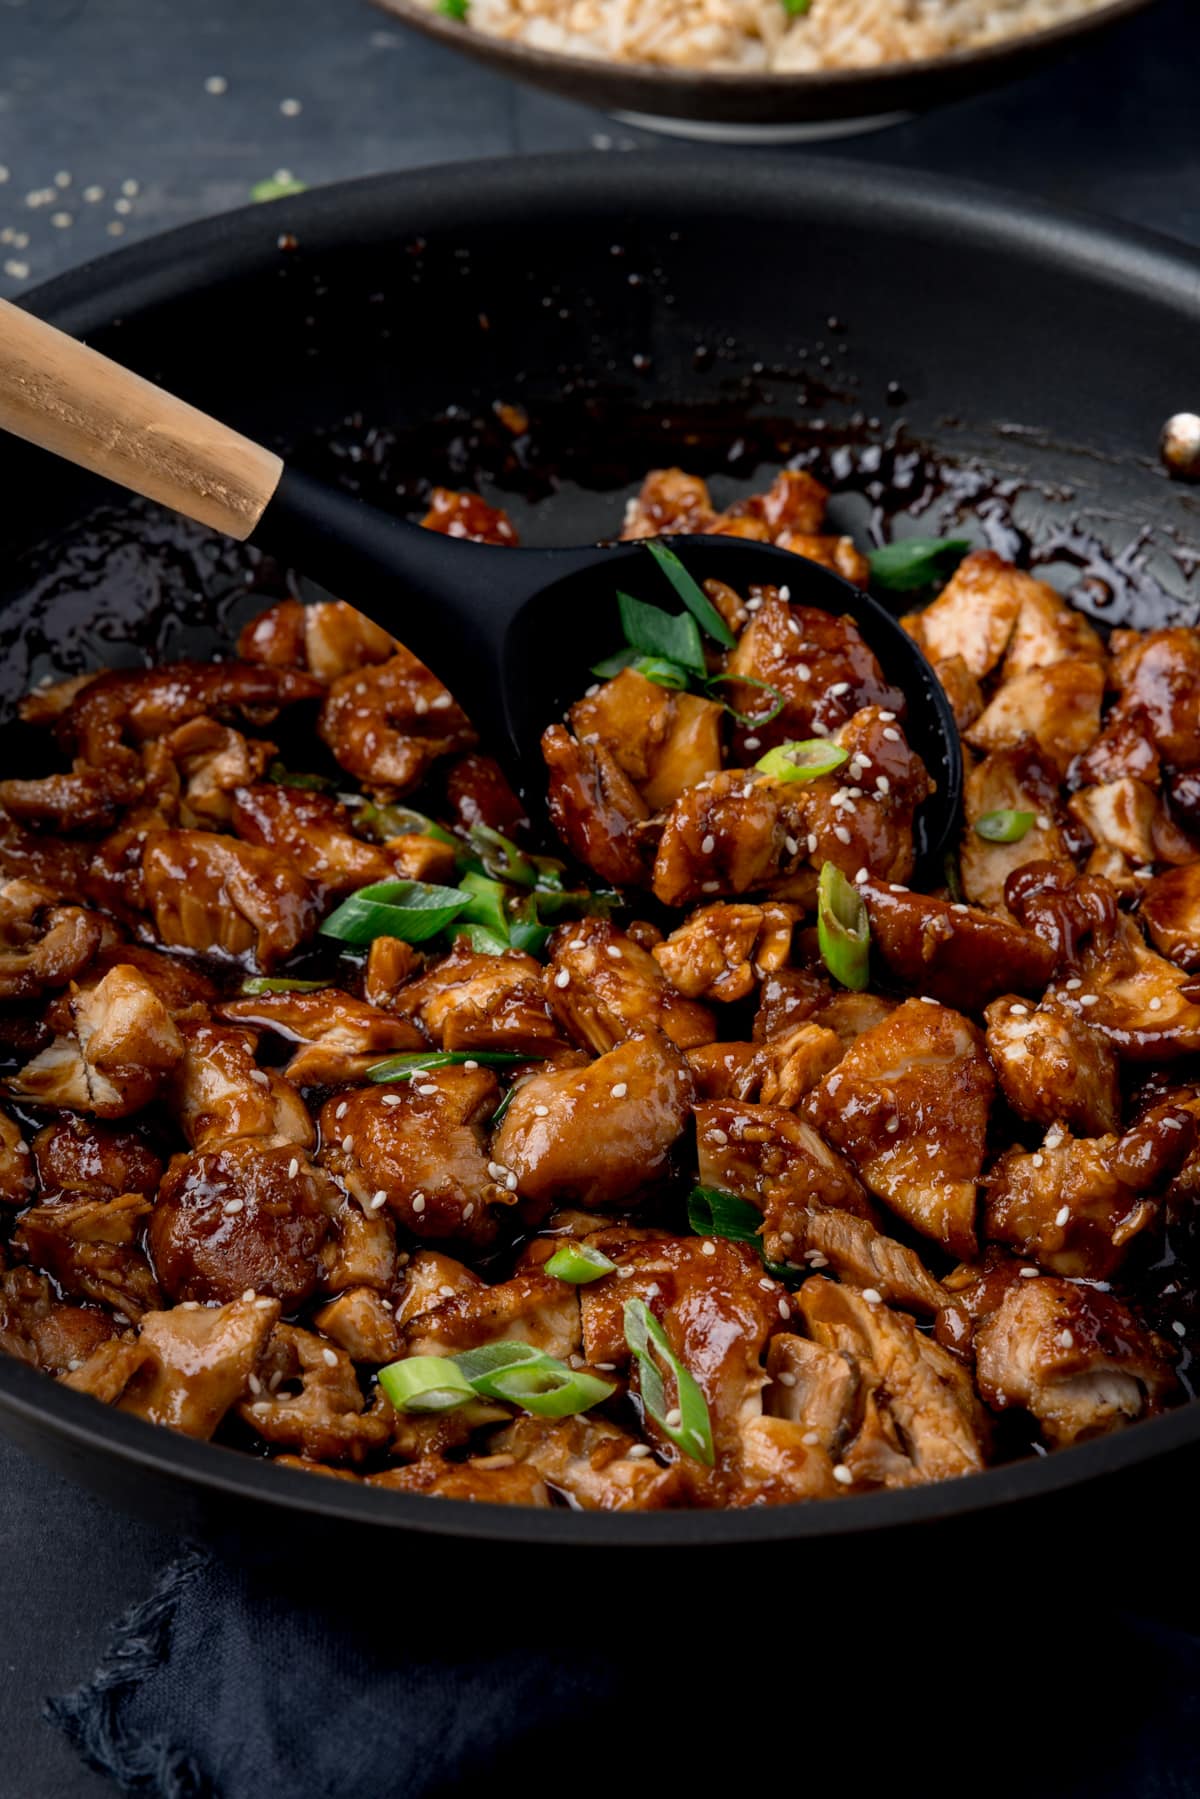 A tall shot of bourbon chicken in a dark grey pan, topped with spring onions and sesame seeds. There is a black spoon with a wooden handle scooping some of the chicken out of the pan. The pan is resting on a grey background with a dark blue napkin. In the top of the image you can slightly see a blue bowl of egg-fried rice.